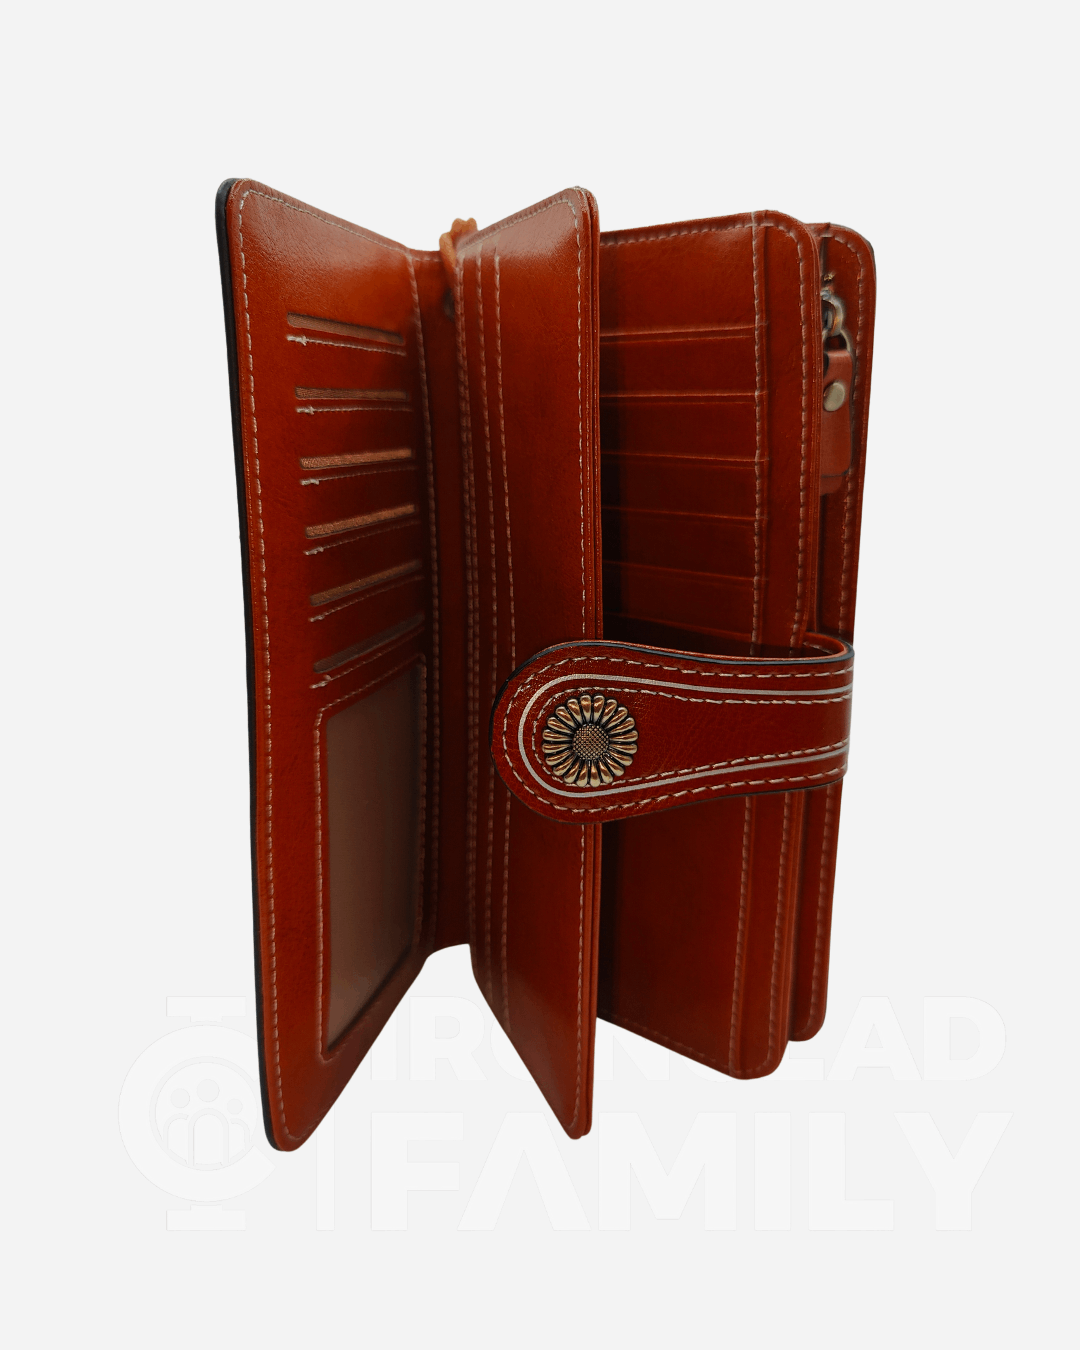 Two-compartment brown leather wallet with RFID protection